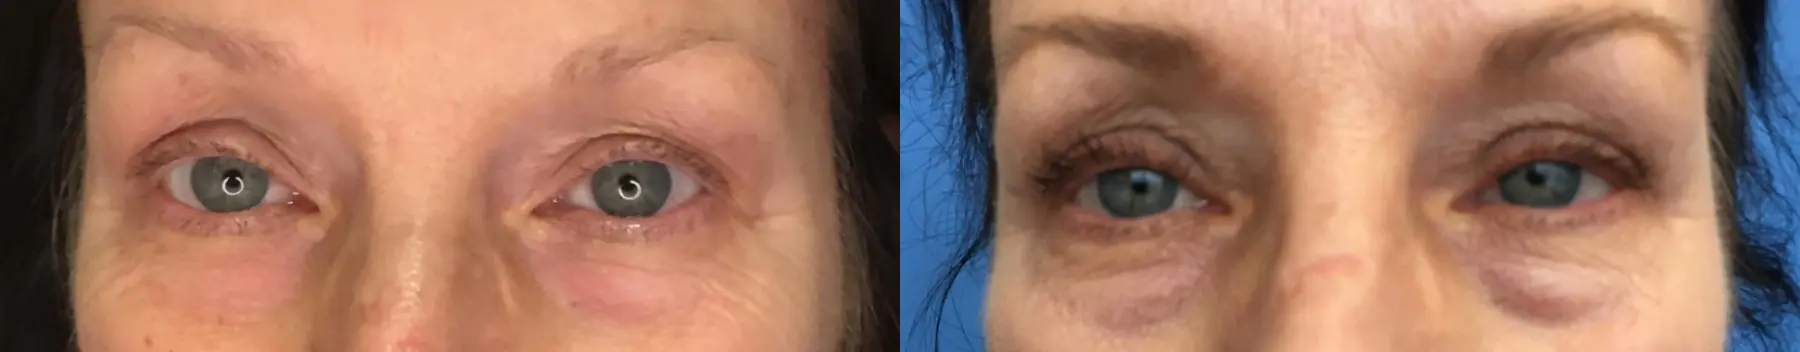 Eyelid Surgery: Patient 24 - Before and After 1